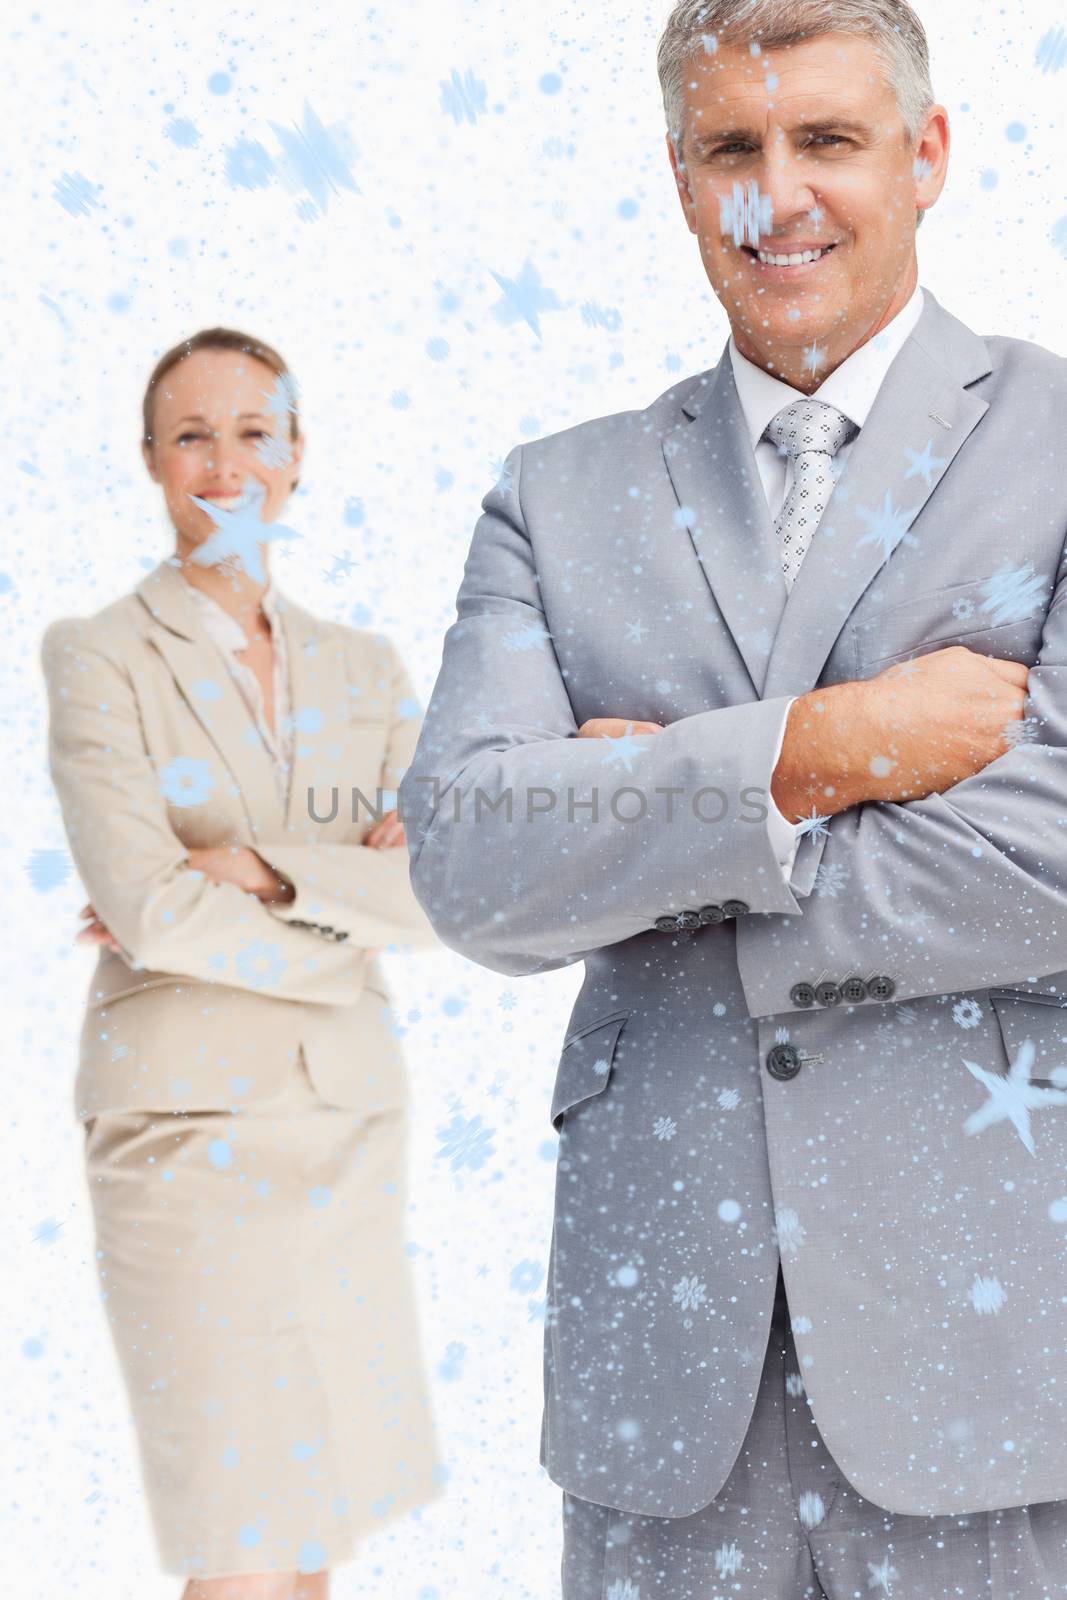 Cheerful business people with folded arms against snow falling